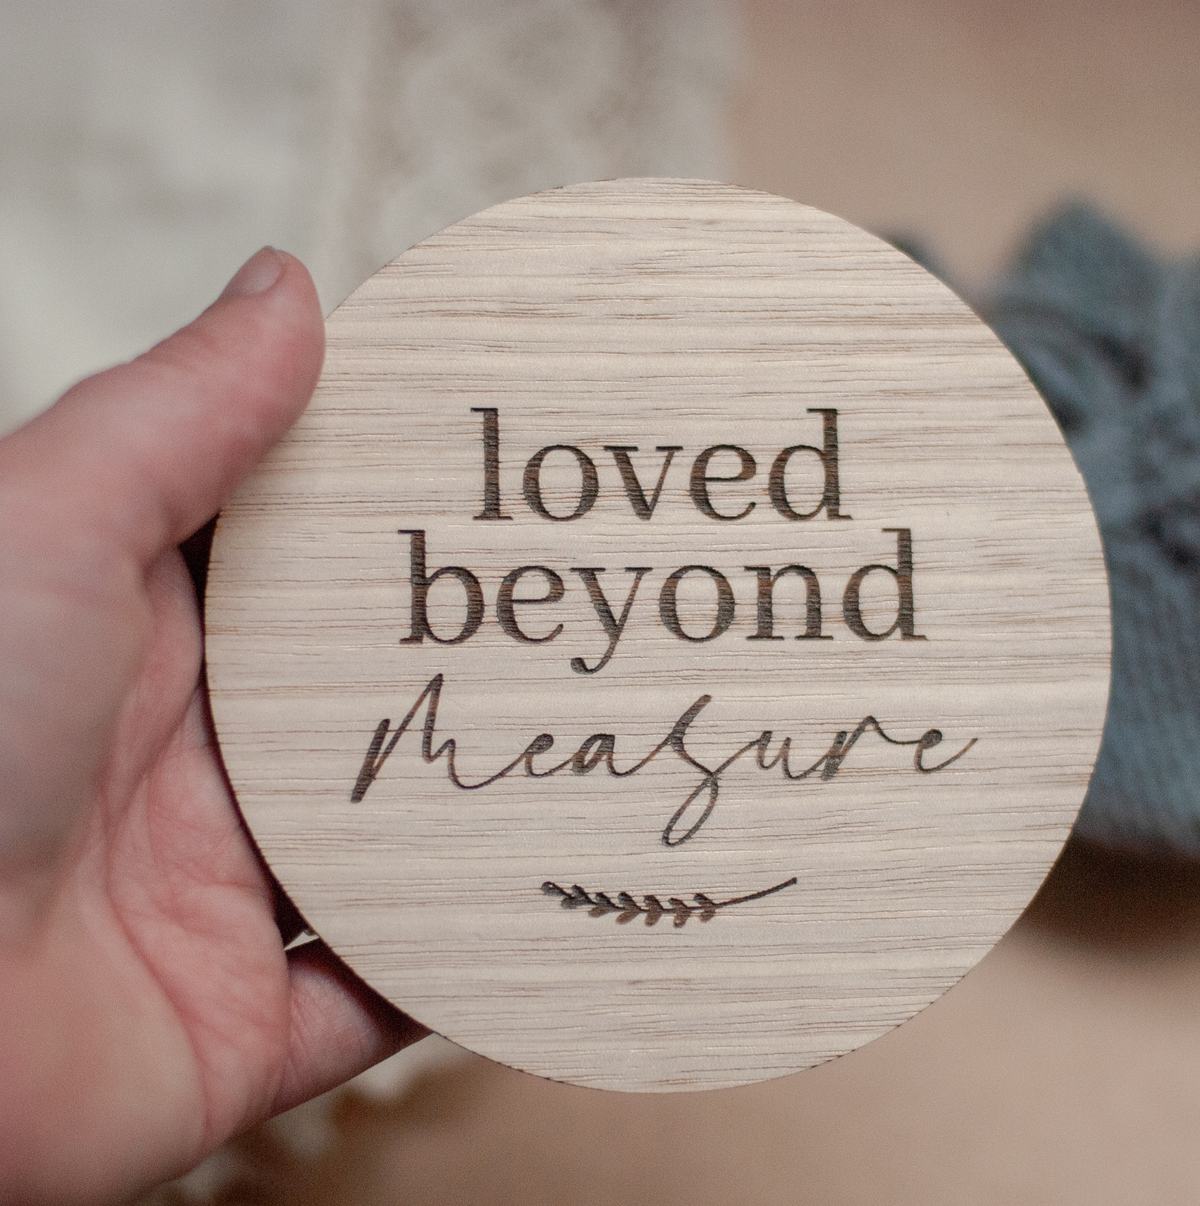 Loved beyond measure christain bible quote on a timber disc to use in pregnancy or birth announcement photos